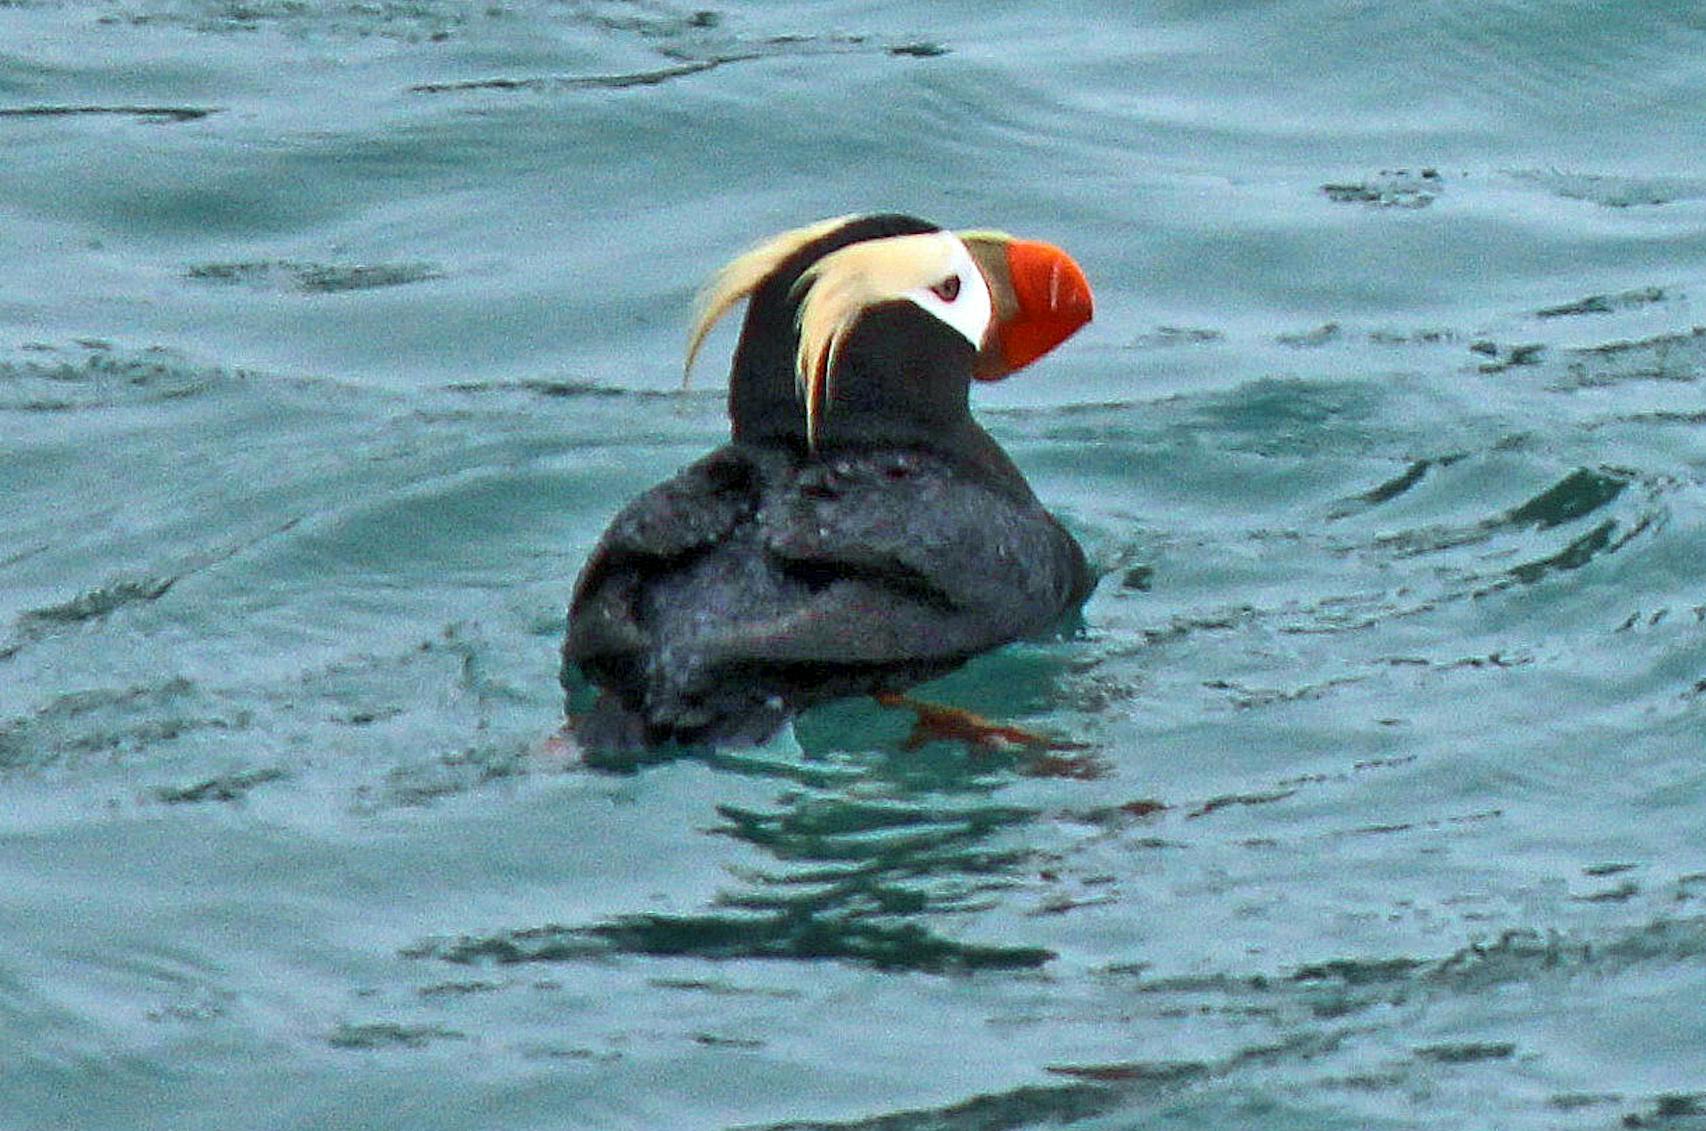 The park is estimated to have 170 bird species. A tufted puffin with its signature orange-red beak. 